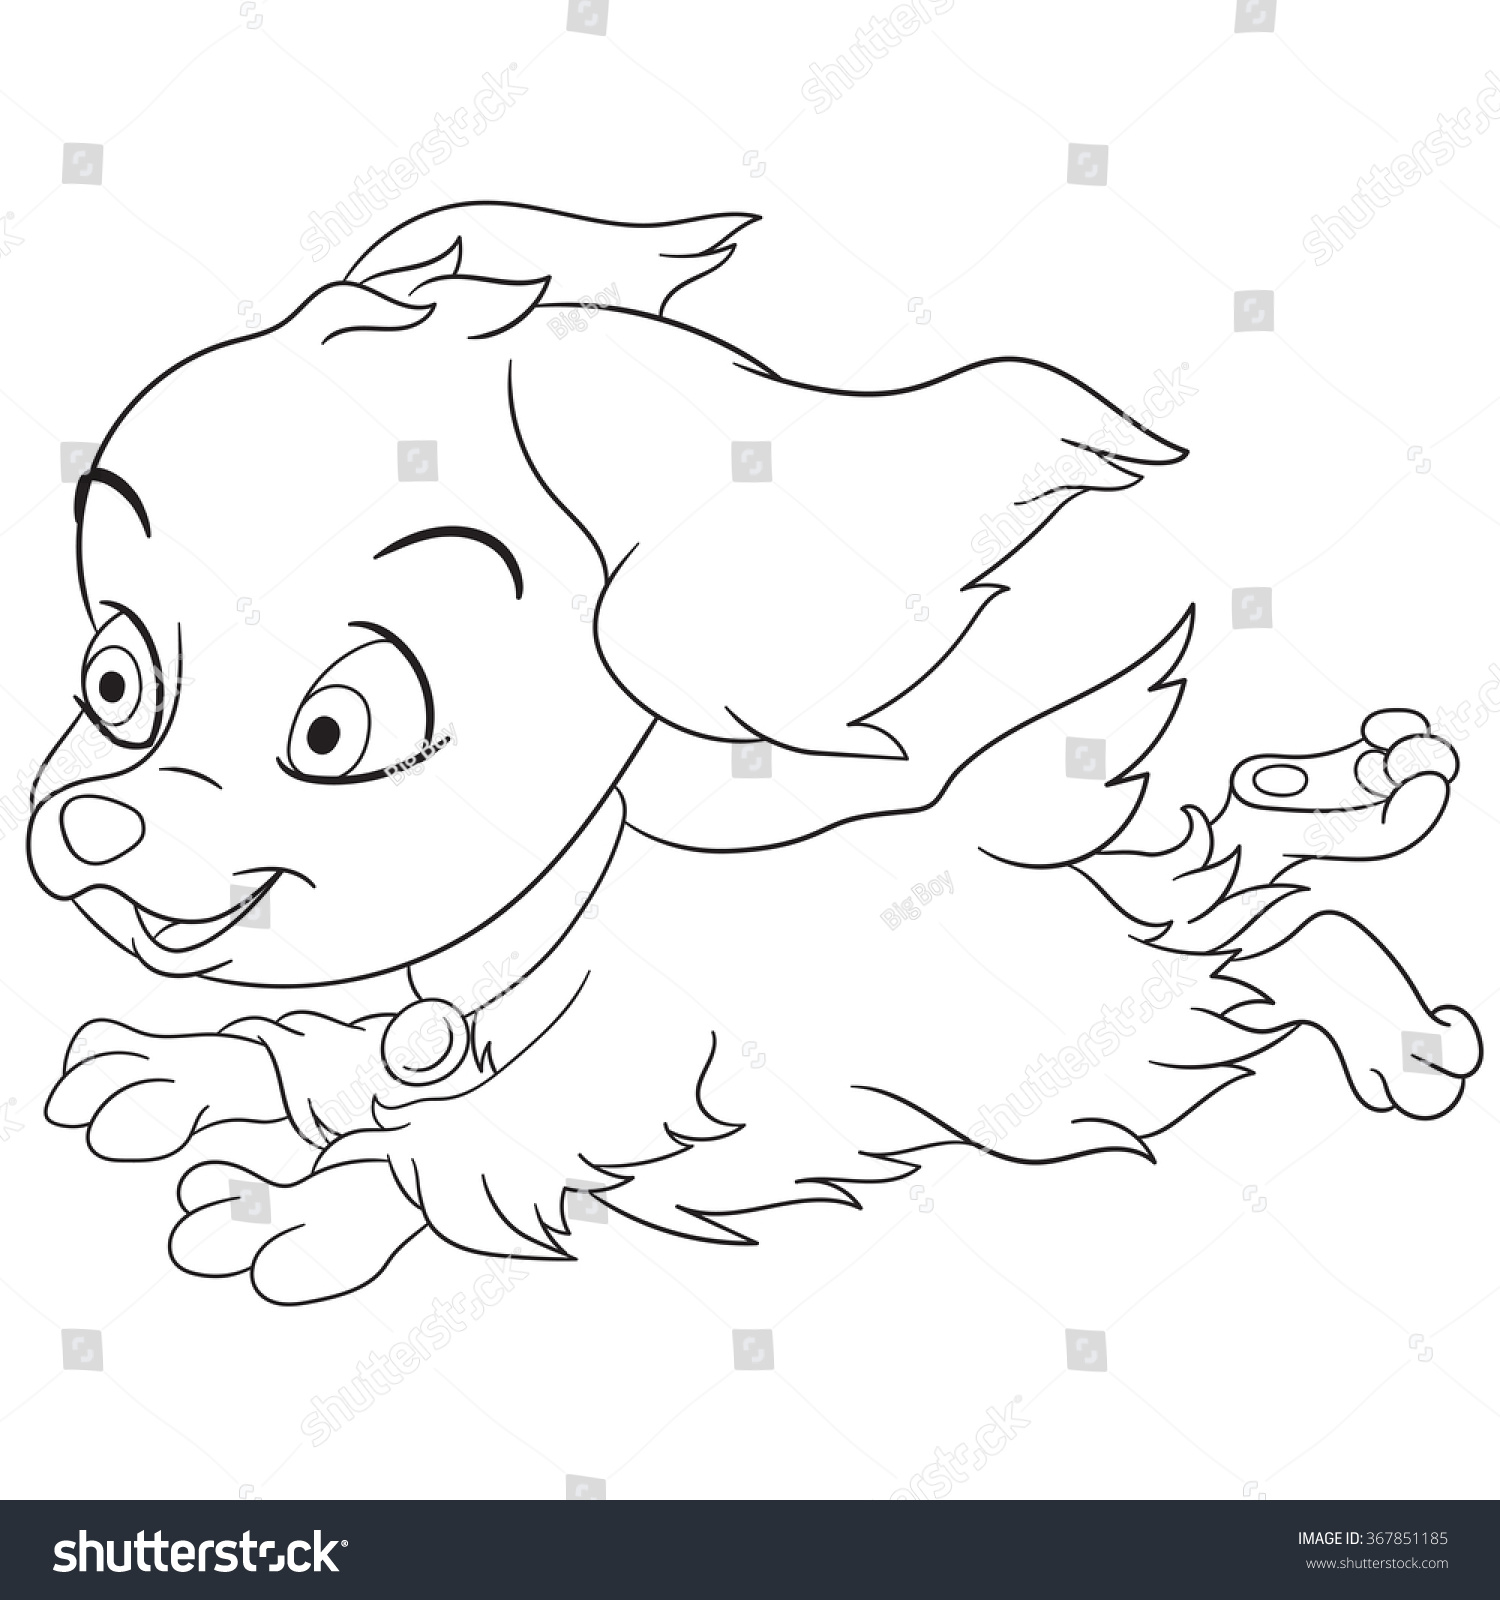 Download Coloring Page Cartoon Spaniel Puppy Dog Stock Vector 367851185 - Shutterstock